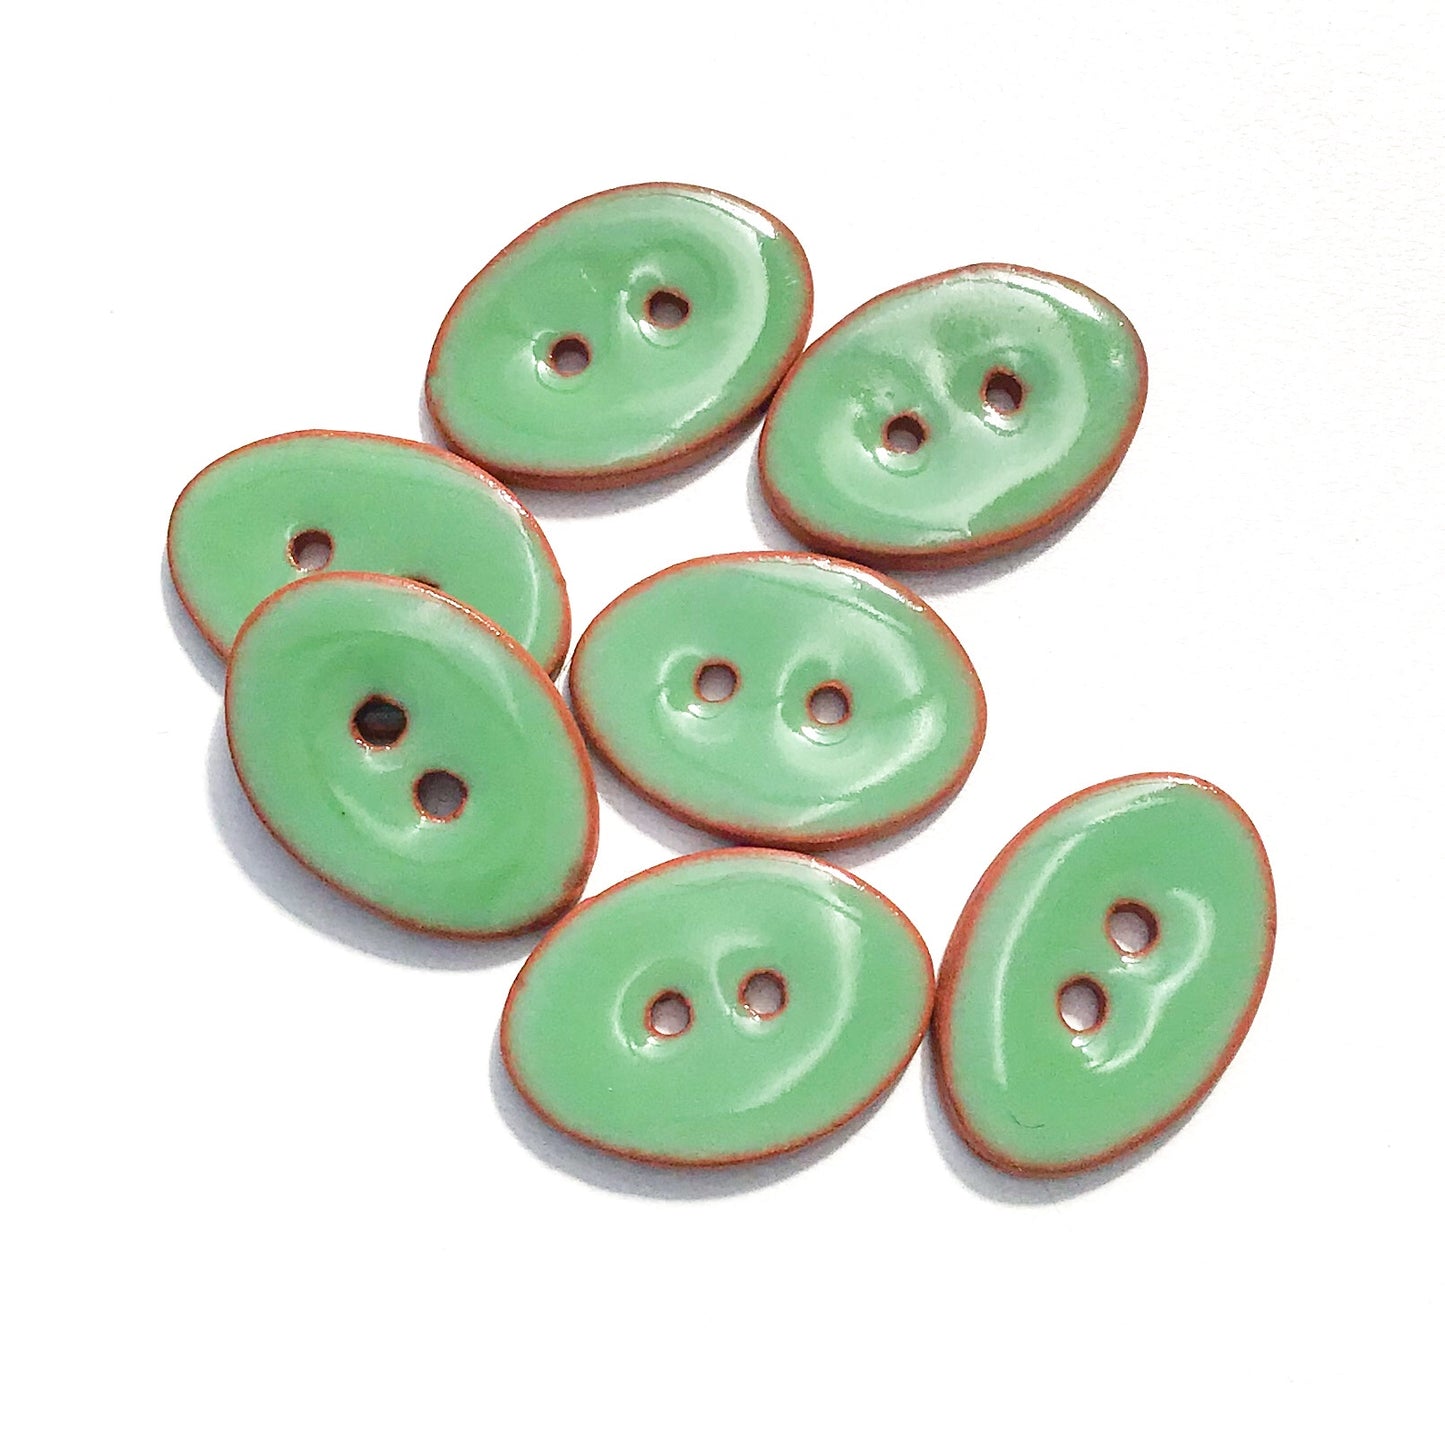 Grassy Green Oval Clay Buttons - 5/8" x 7/8" - 7 Pack (ws-93)